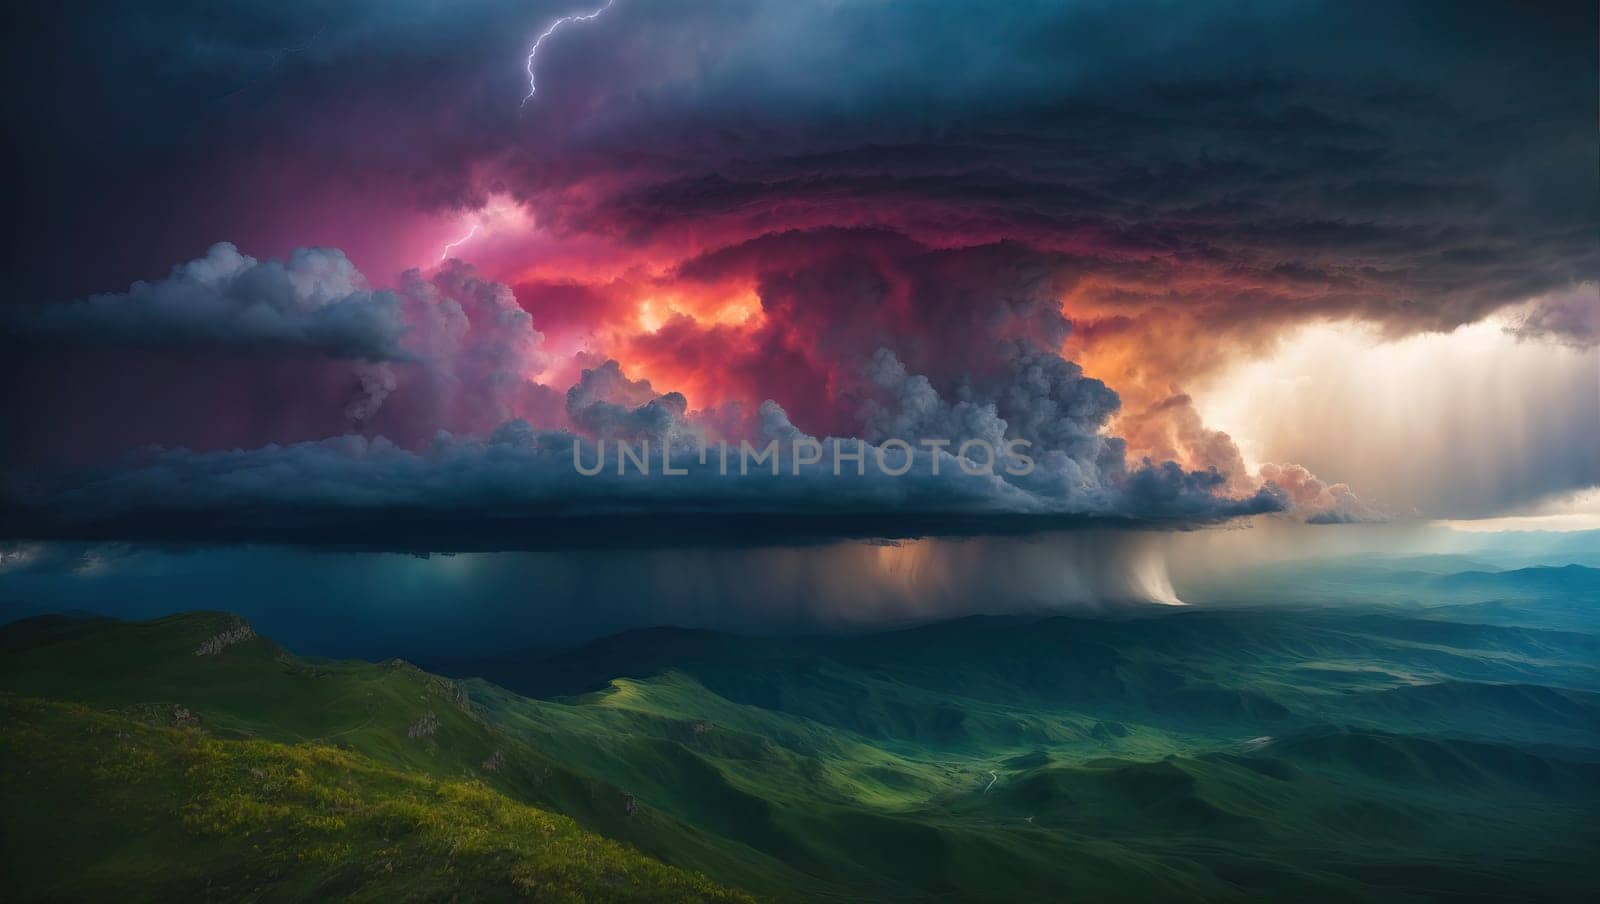 Epic dramatic storm cell as seen from high on a mountain by applesstock